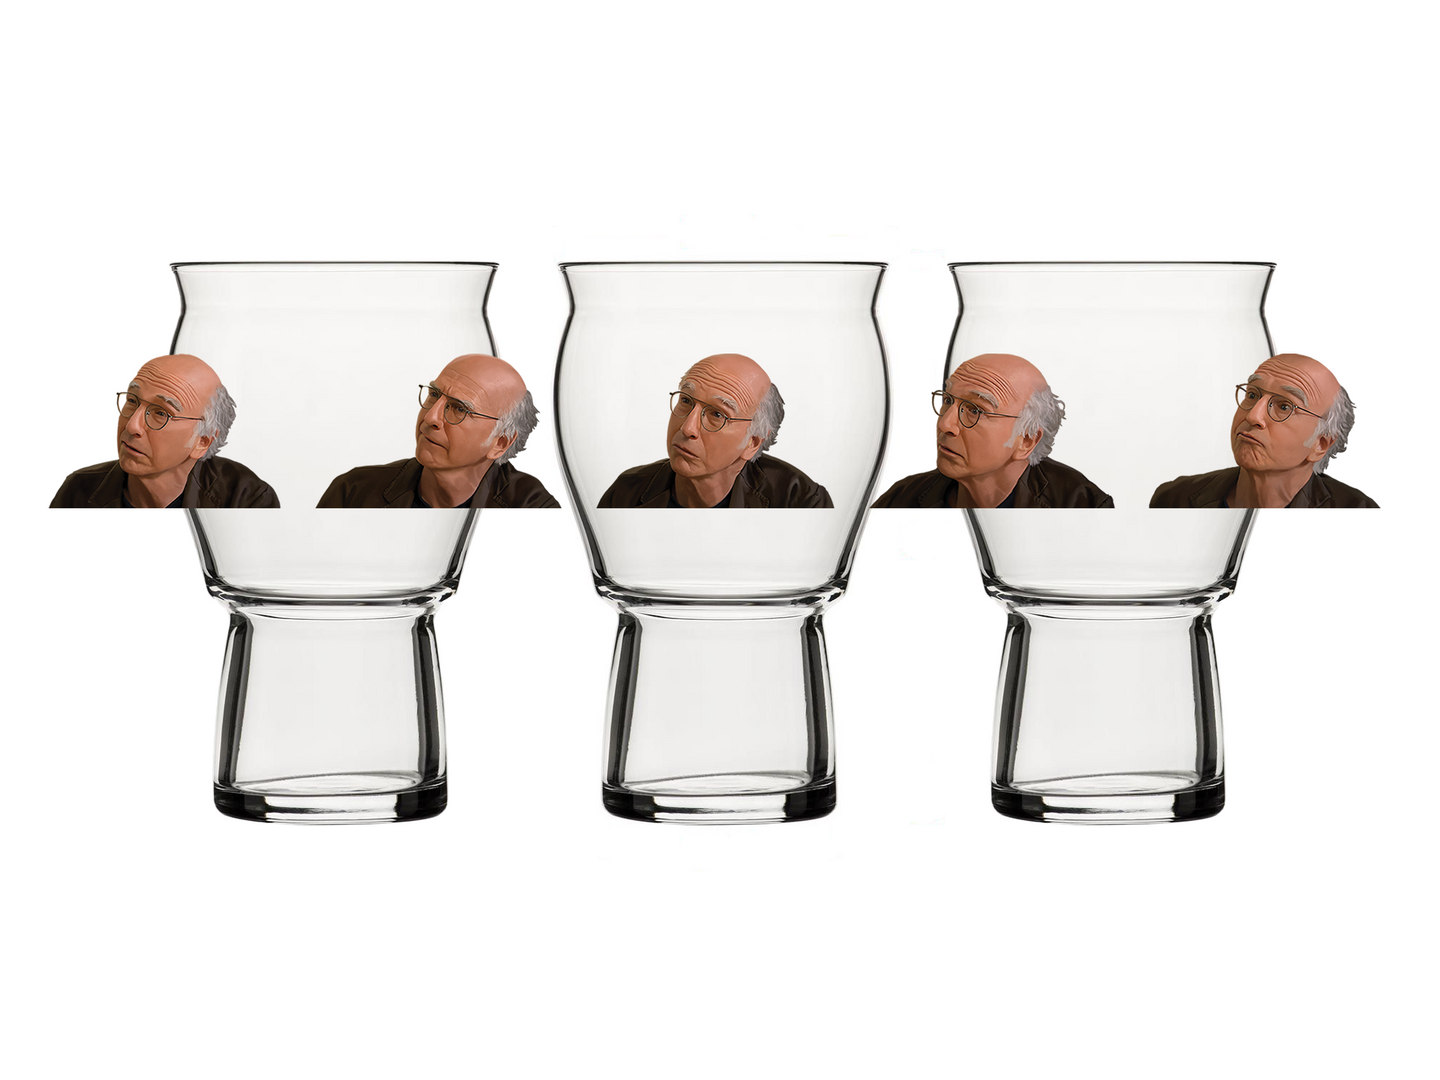 The Stare - PREORDER - Larry David Curb Beer Glass (ships early April)